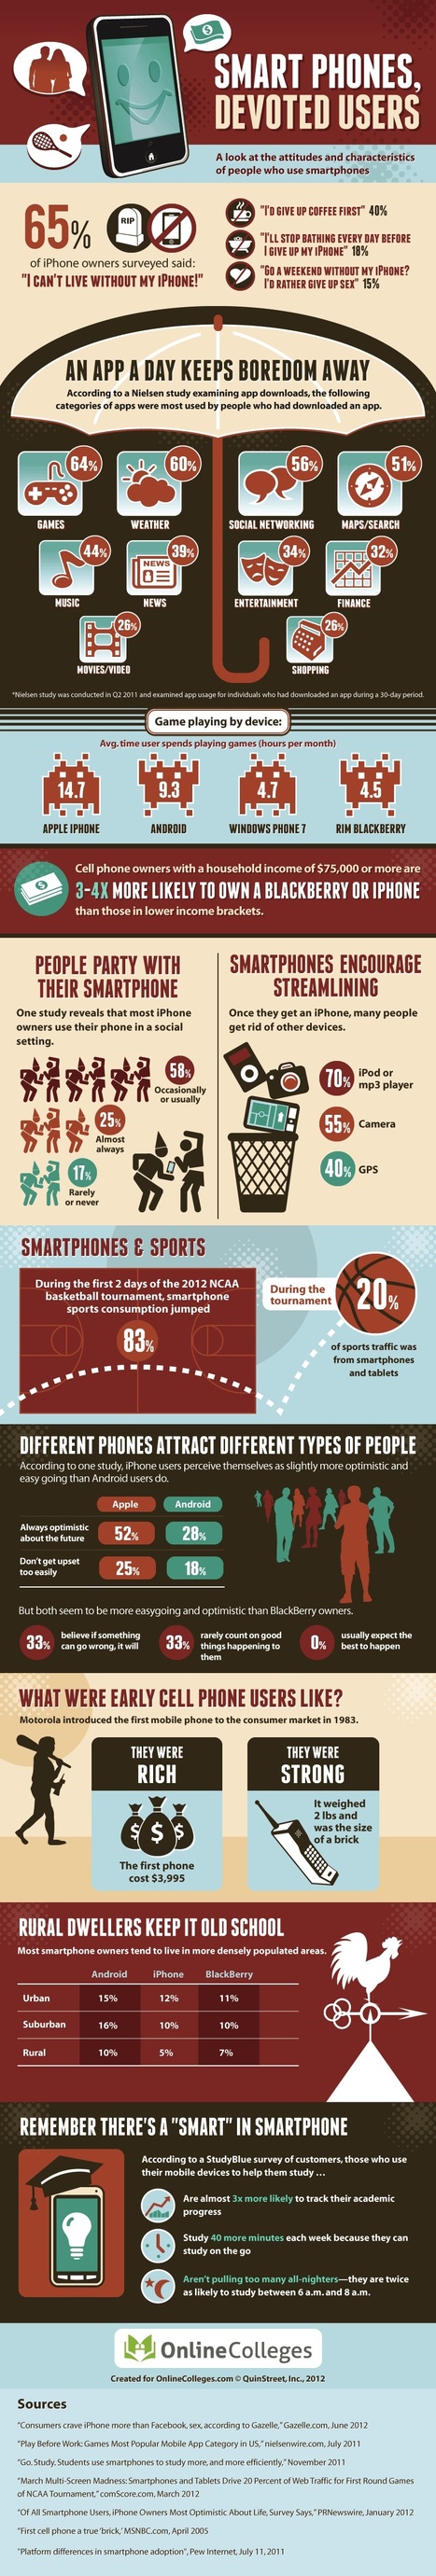 Are You Addicted to Your Smartphone? [INFOGRAPHIC] | E-Learning-Inclusivo (Mashup) | Scoop.it